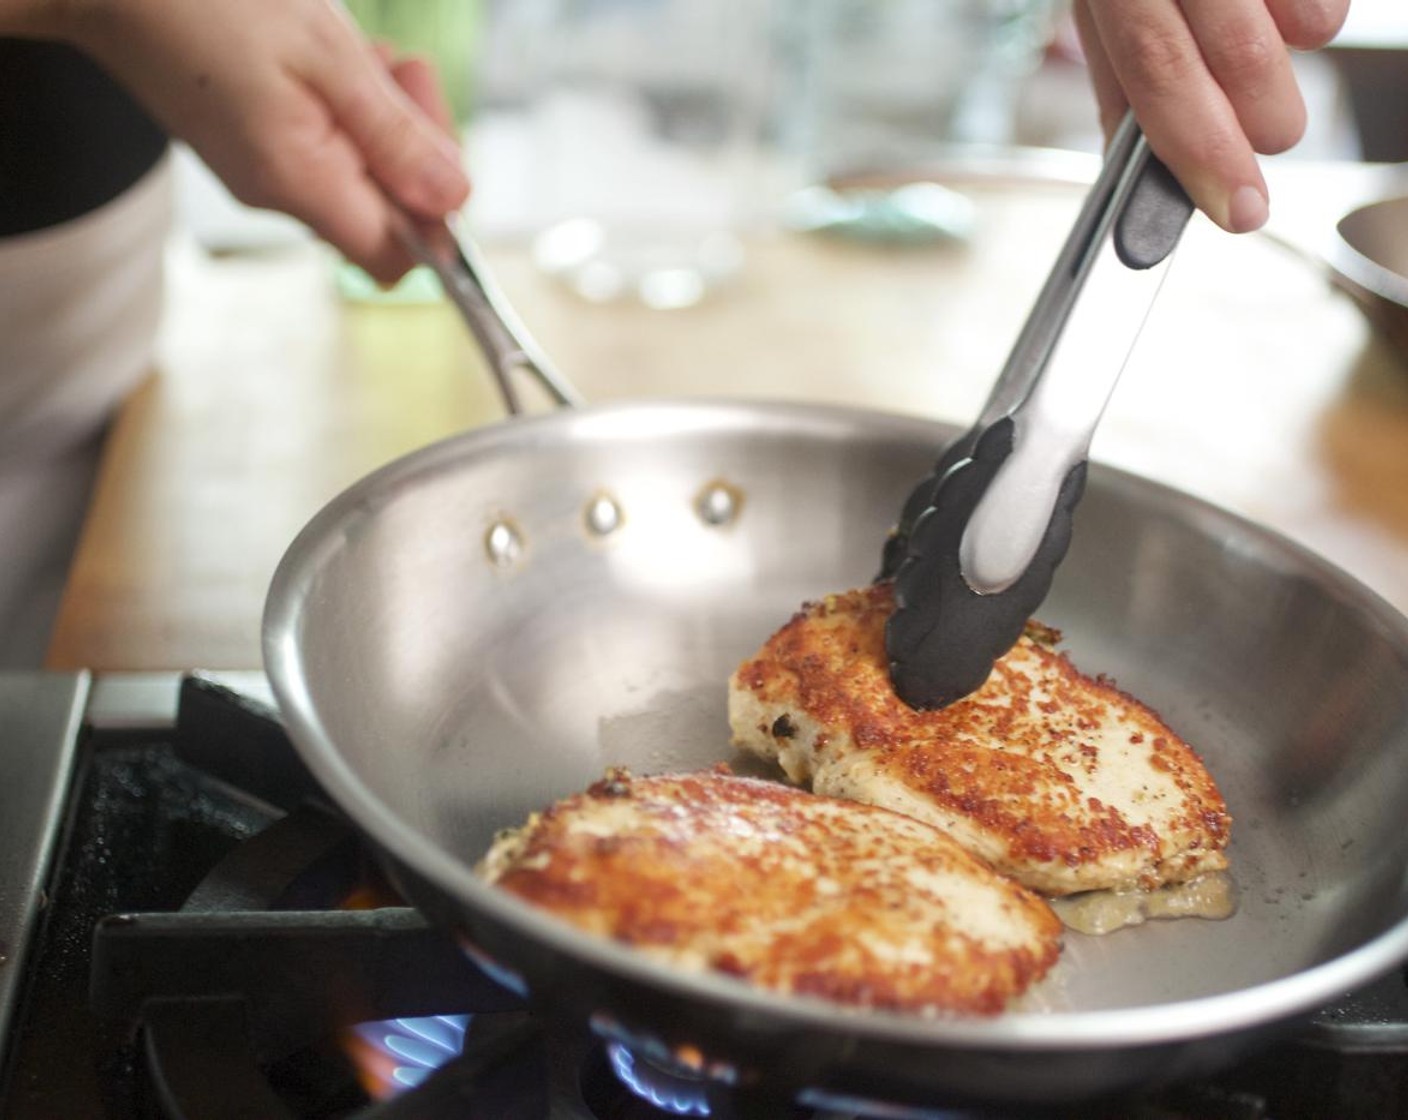 step 9 Heat Olive Oil (1 Tbsp) in a medium sauté pan over medium-high heat. When hot, add the chicken and cook for 5 minutes on one side.